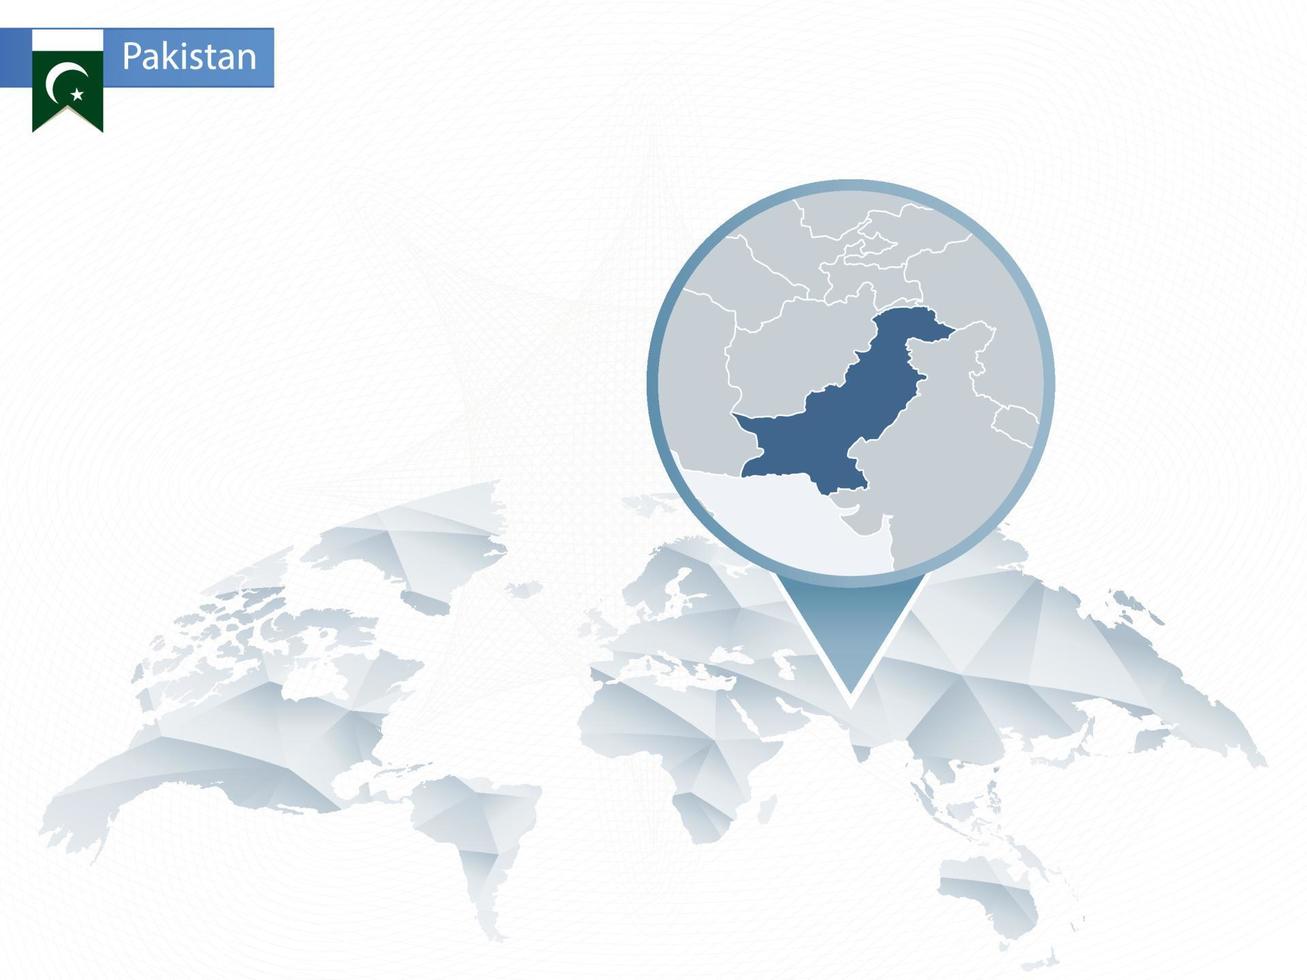 Abstract rounded World Map with pinned detailed Pakistan map. vector